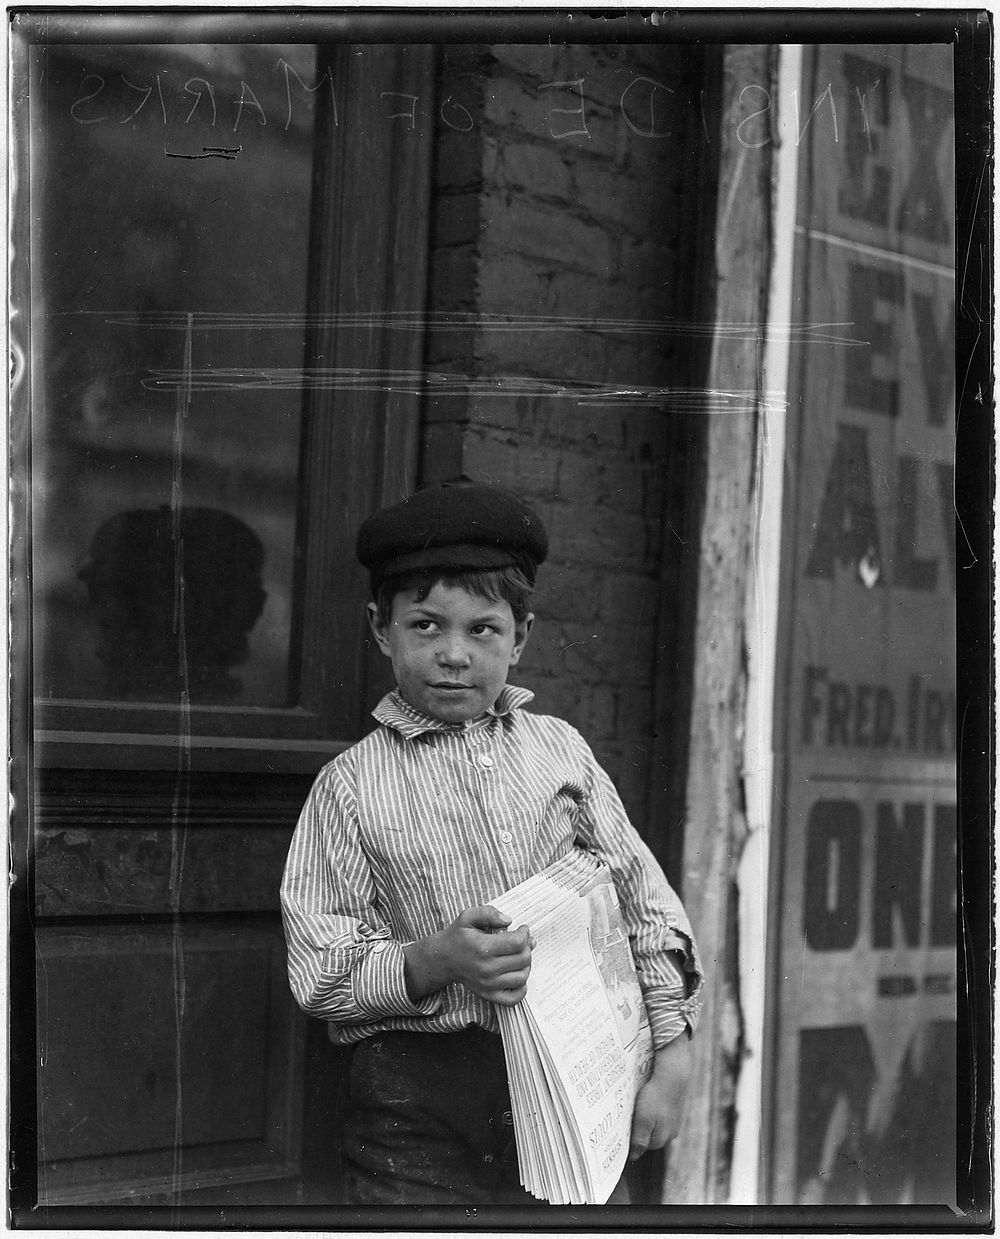 Joe Smith, 8 years old. St. Louis, Mo, May 1910. Photographer: Hine, Lewis. Original public domain image from Flickr